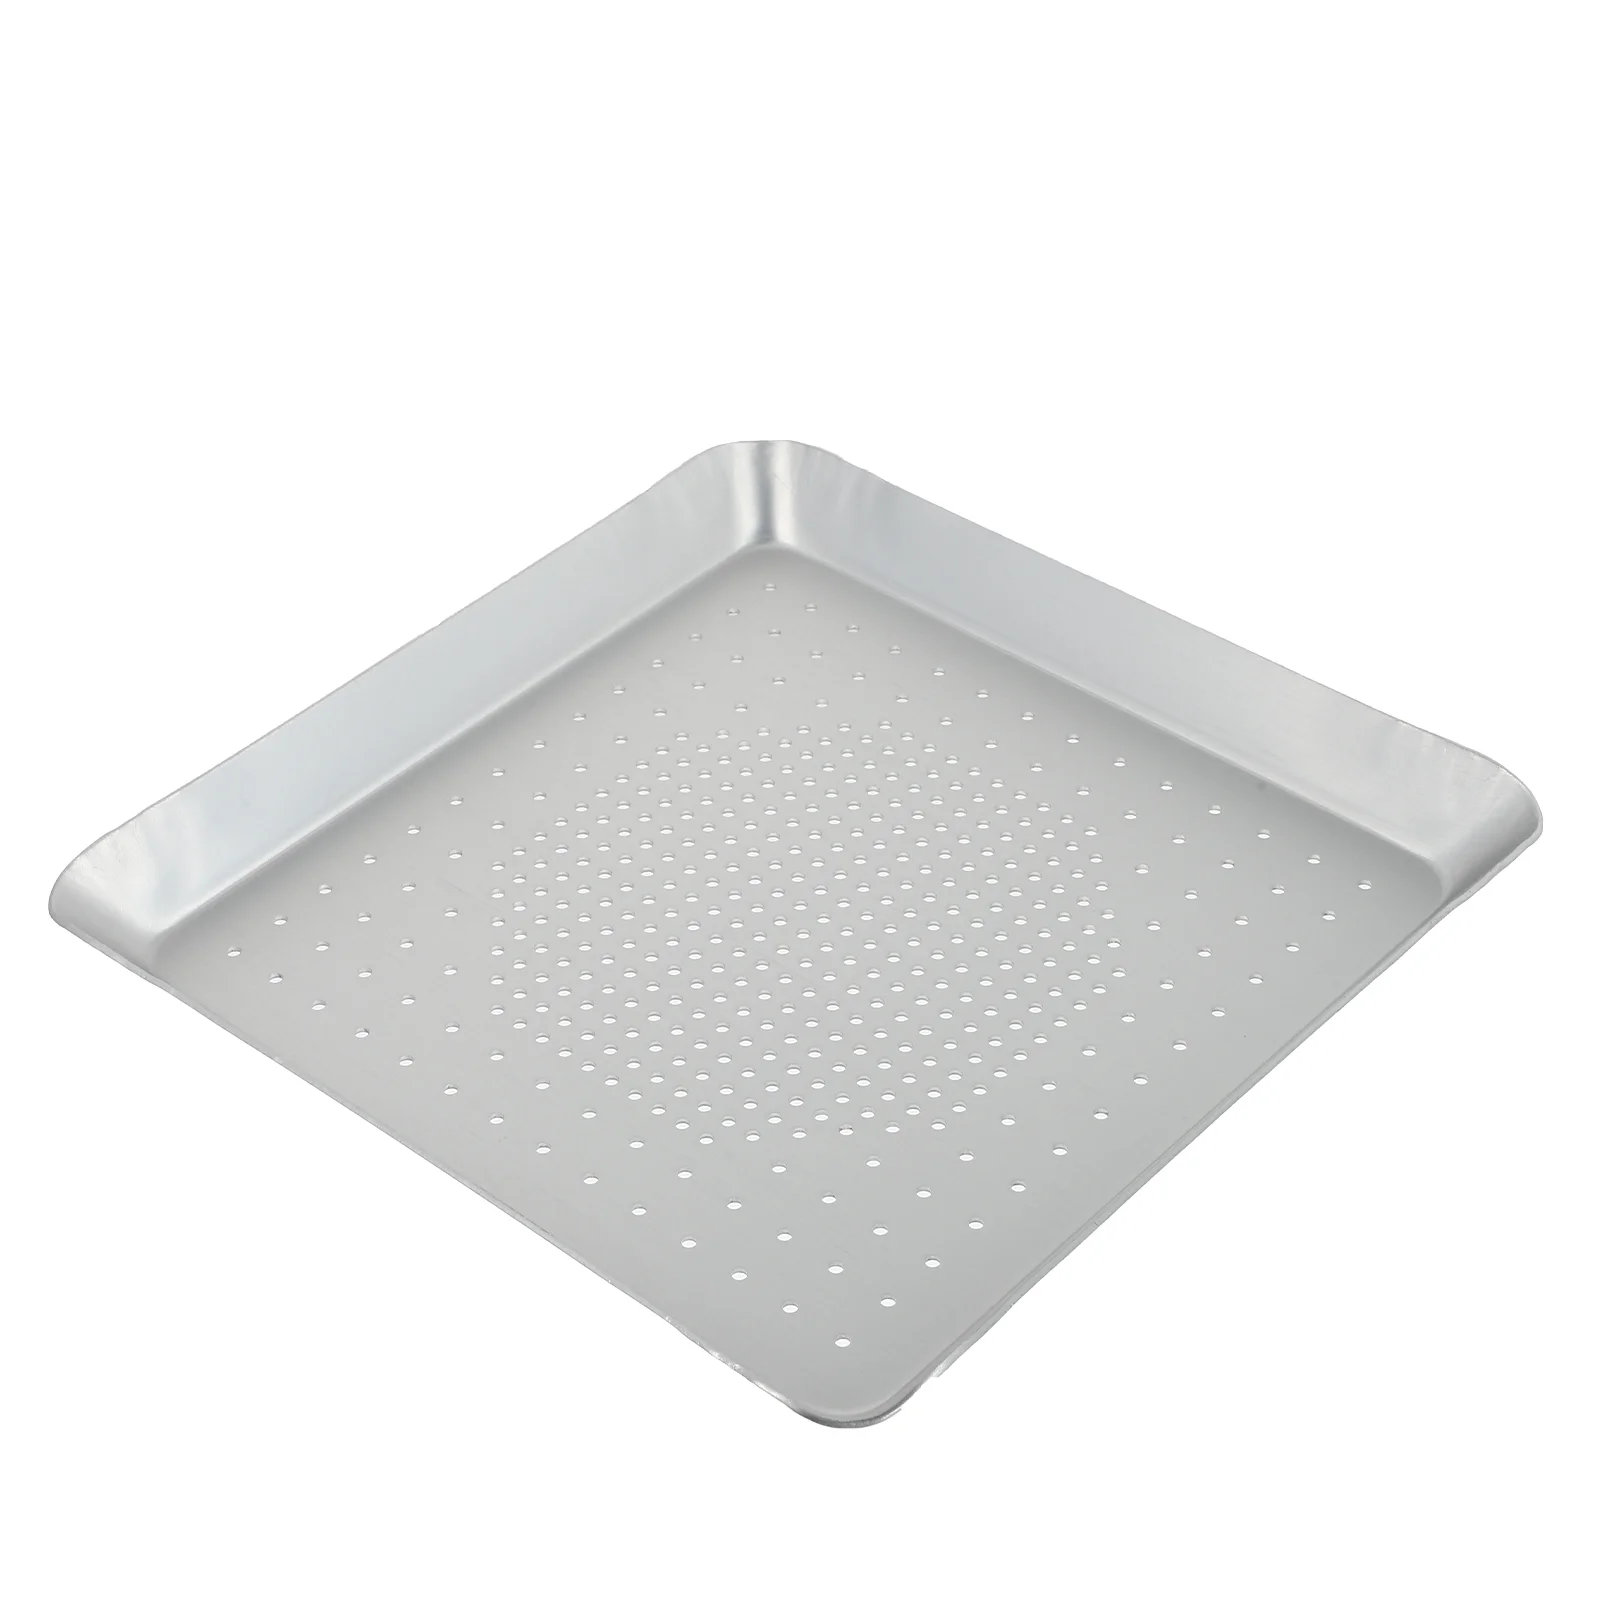 

Pizza Pan Tray Baking Oven Square Holesplate Noncrisper Stick Steel Stainless Cake Perforated Sheet Pie Bakeware Aluminium